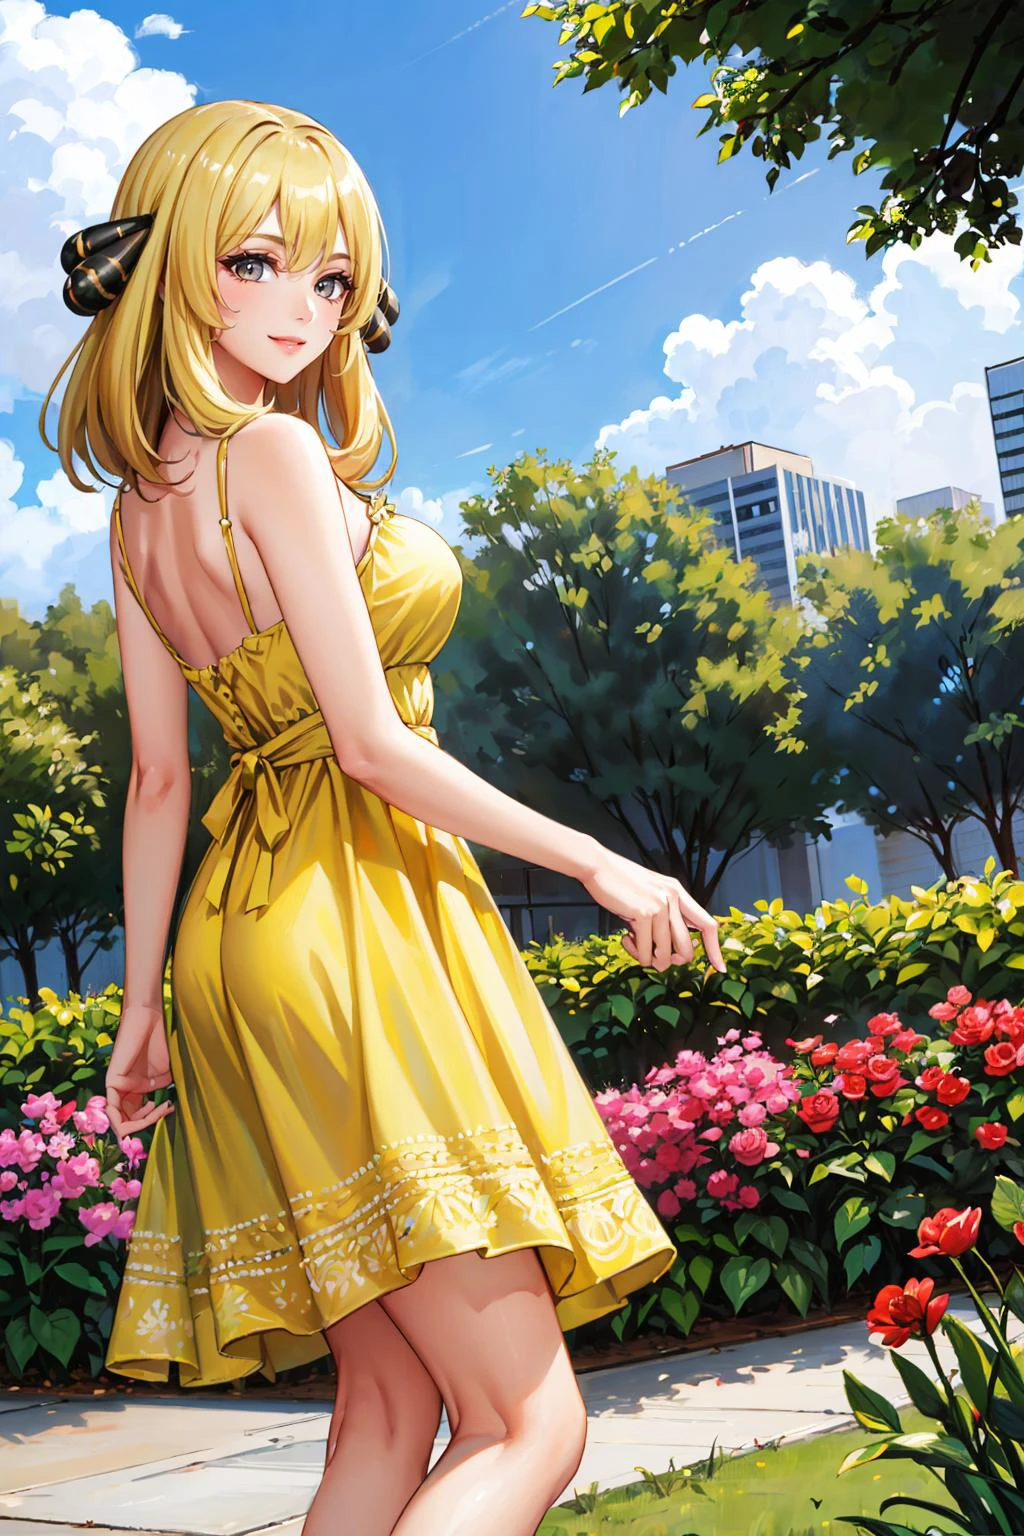 masterpiece, best quality, defCynthia, hair ornament, from behind, yellow sundress, large breasts, smile, mature female, garden, city skyline, blue sky edgYSD,woman wearing a yellow sundress